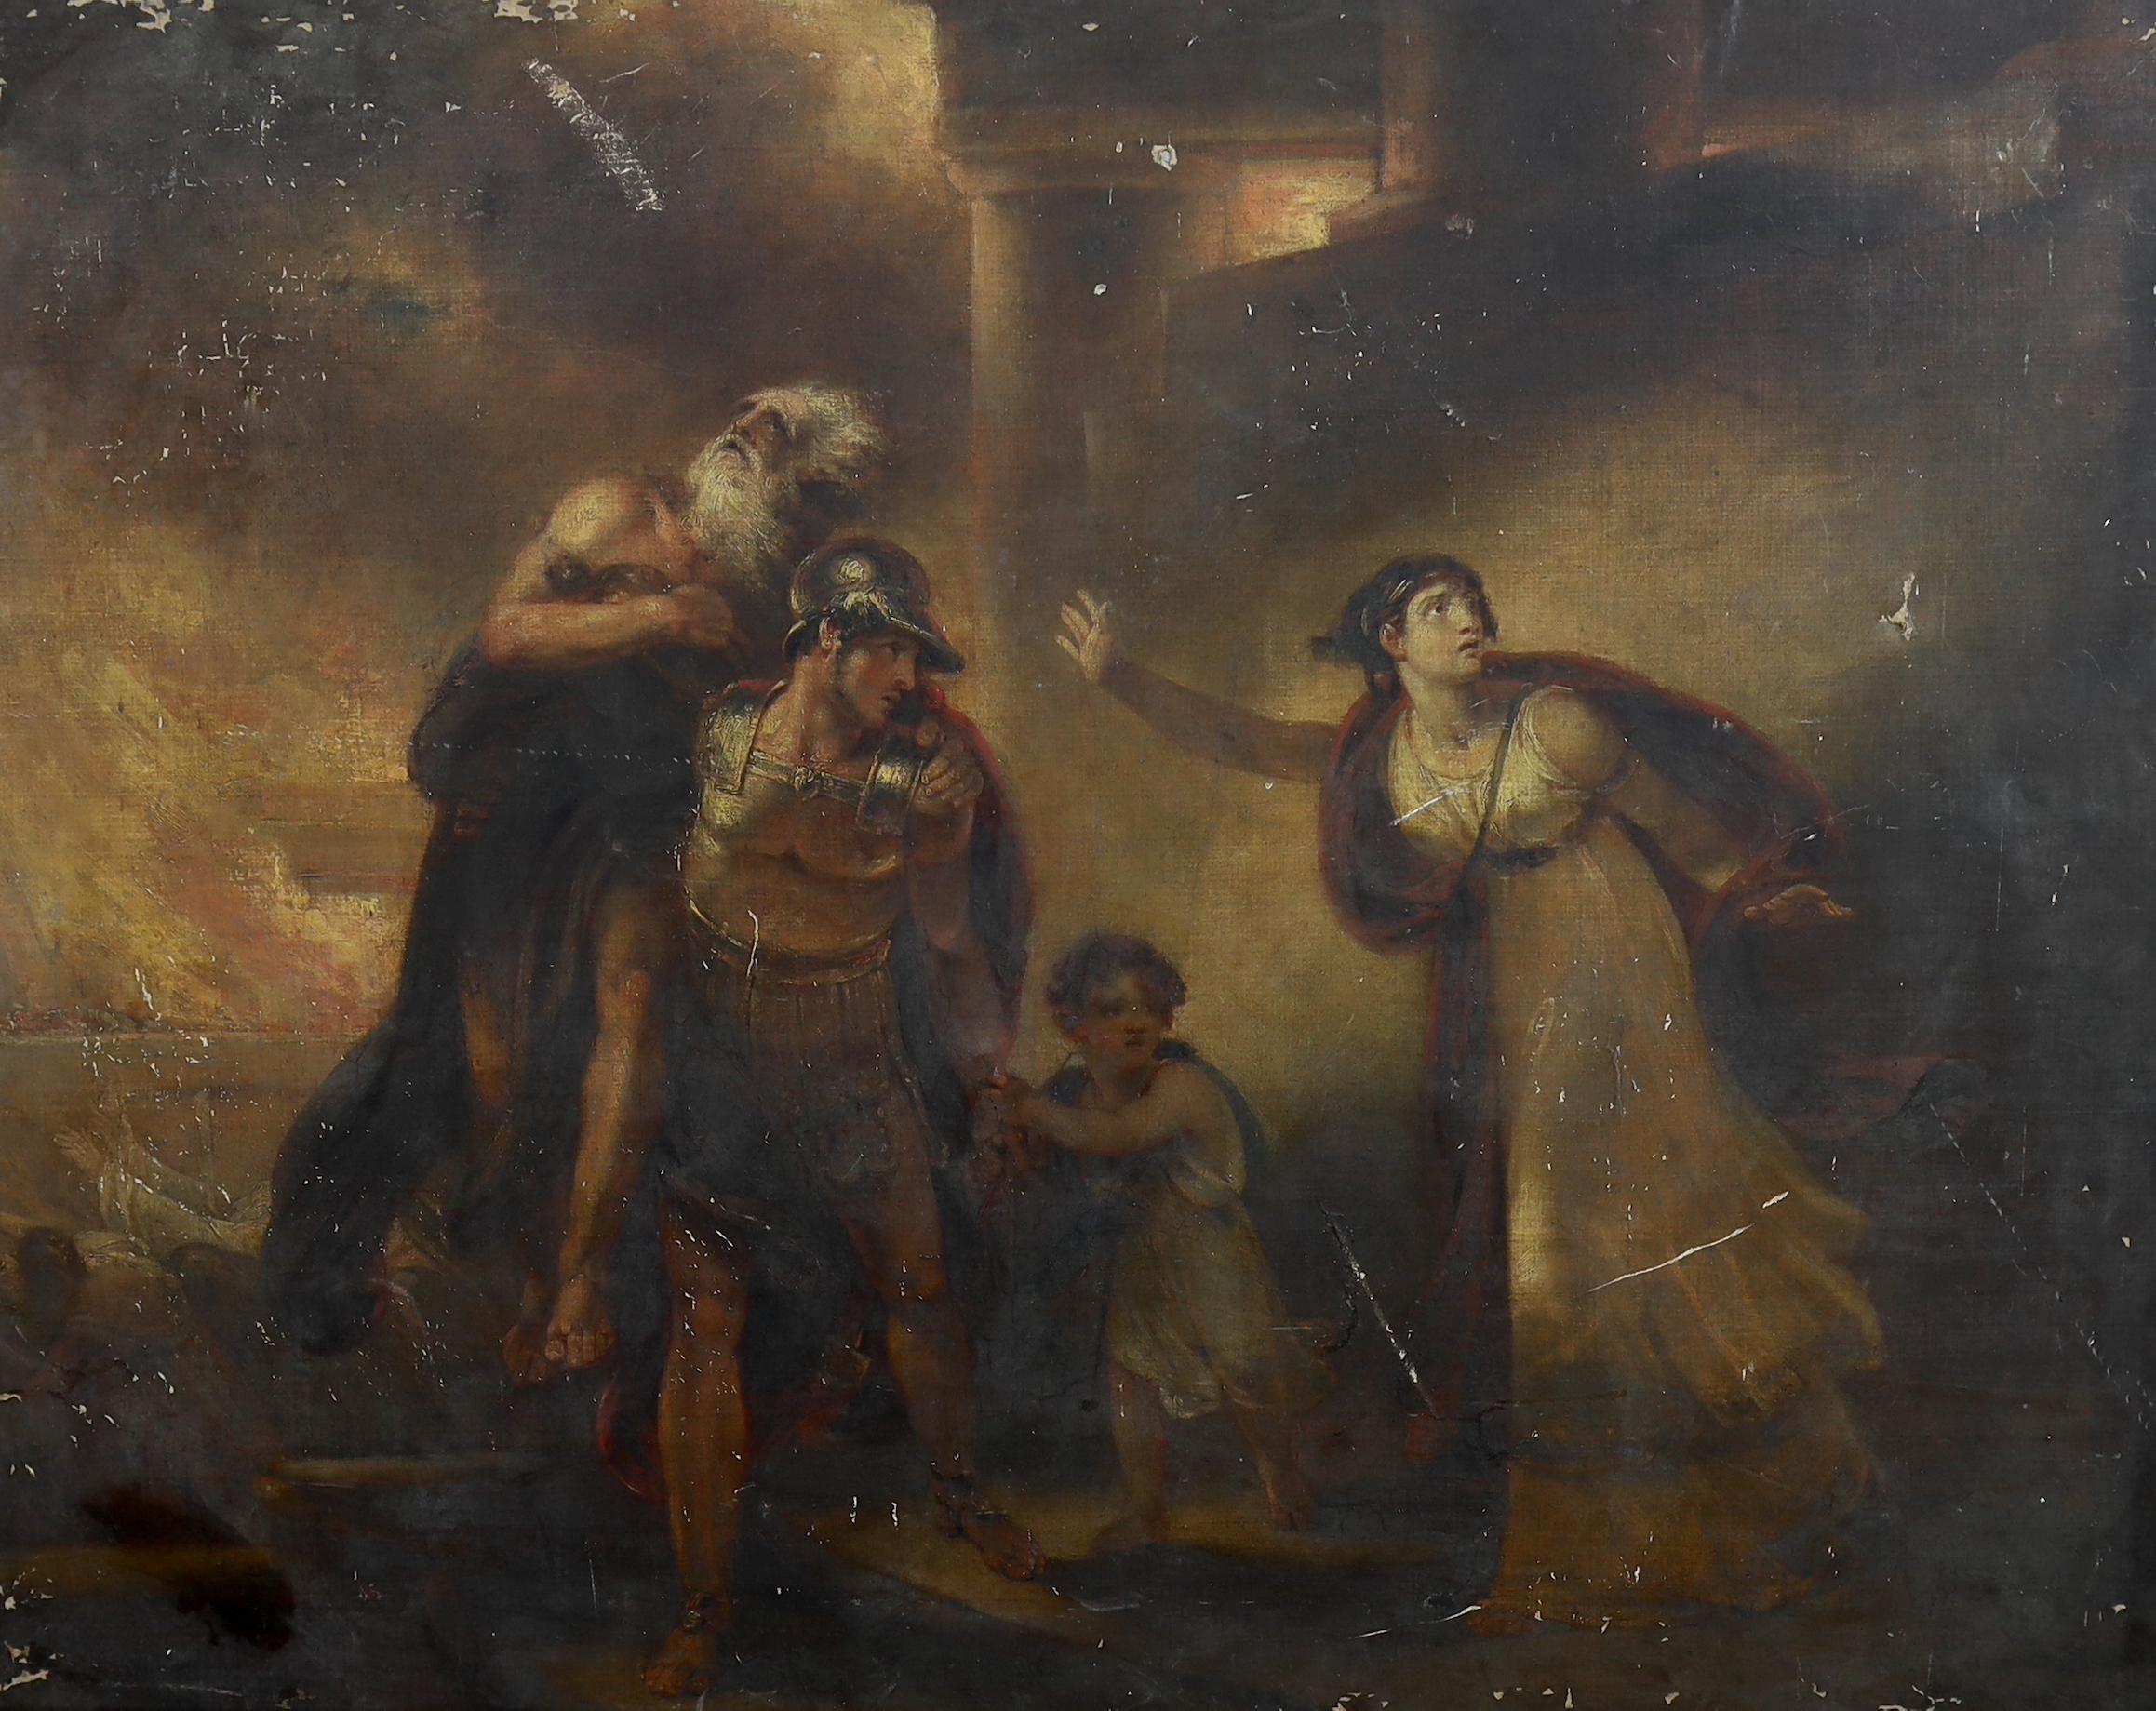 Attributed to Henry Howard RA (1769-1847), Aeneas and his family fleeing Troy, oil on canvas, 110 x 137cm